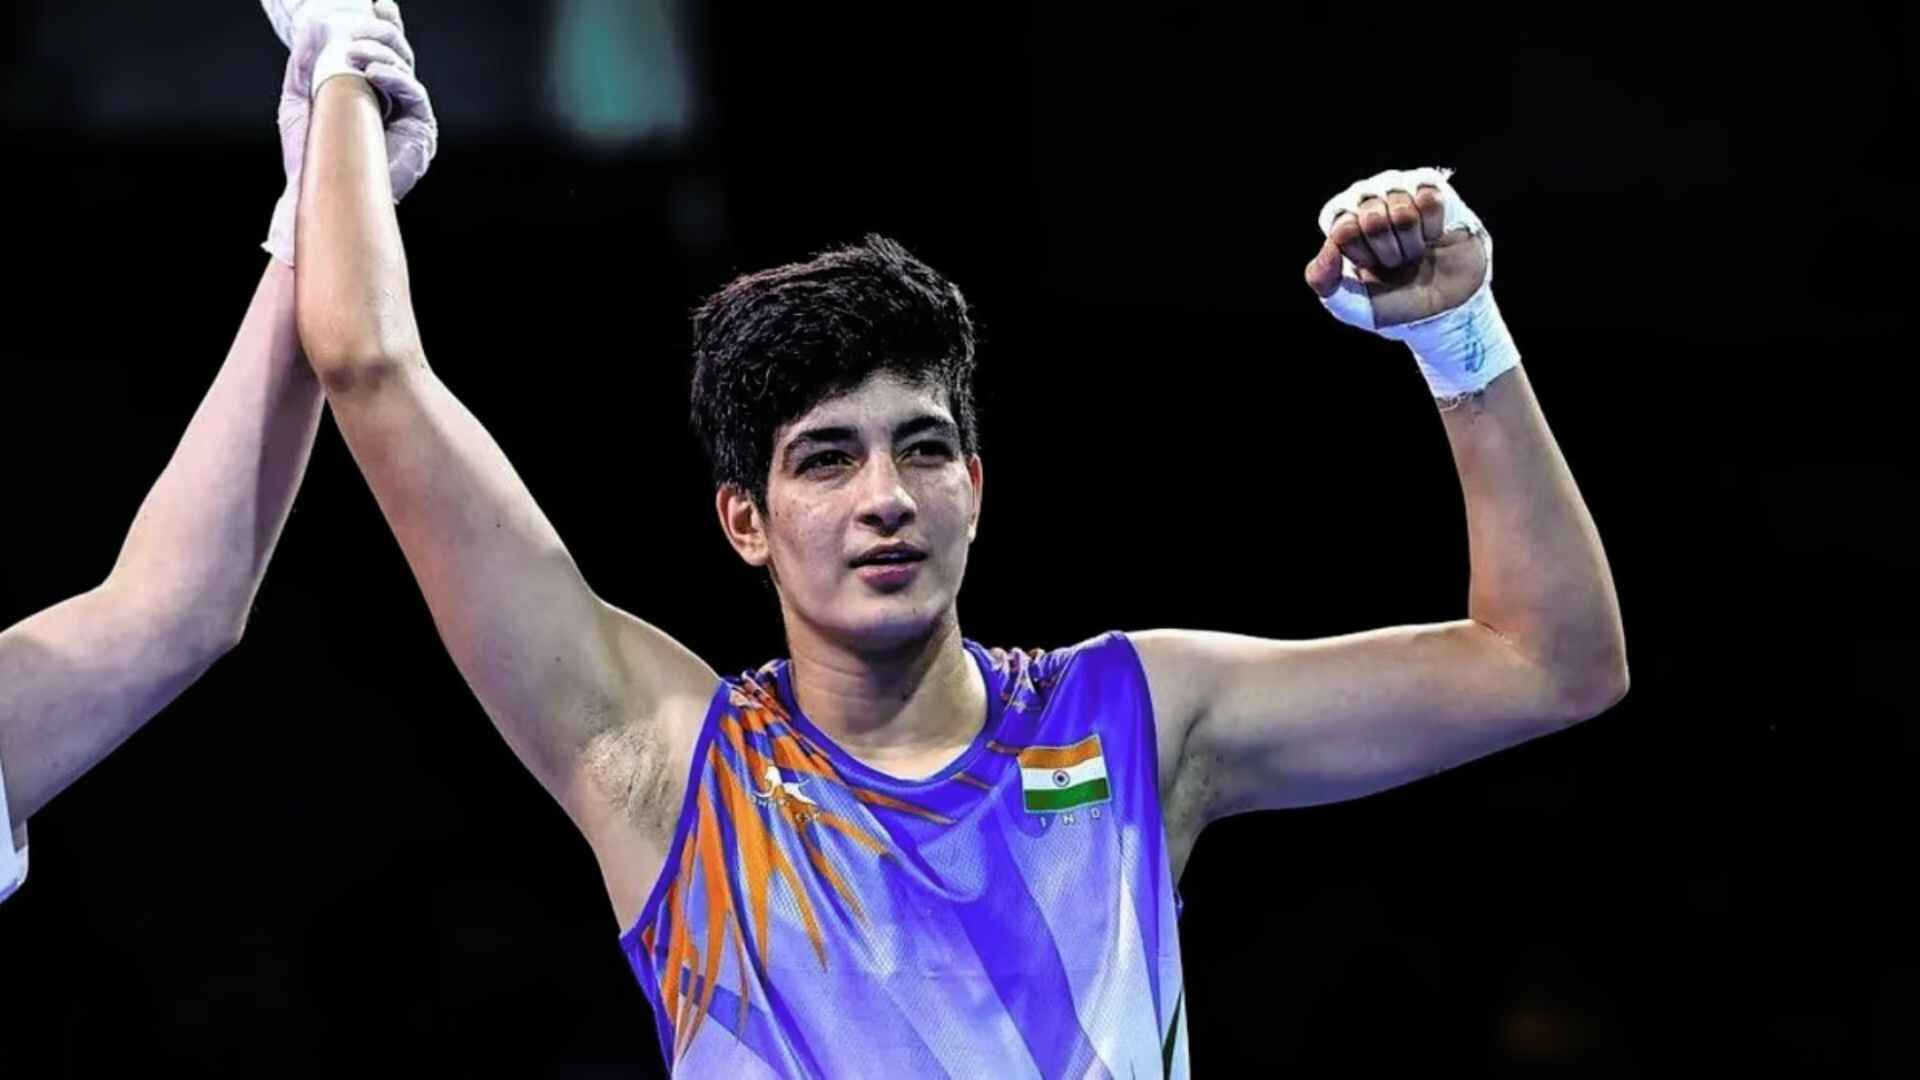 India To Compete In Women’s 57kg At Olympic Qualifiers Post Suspension Of Parveen Hooda